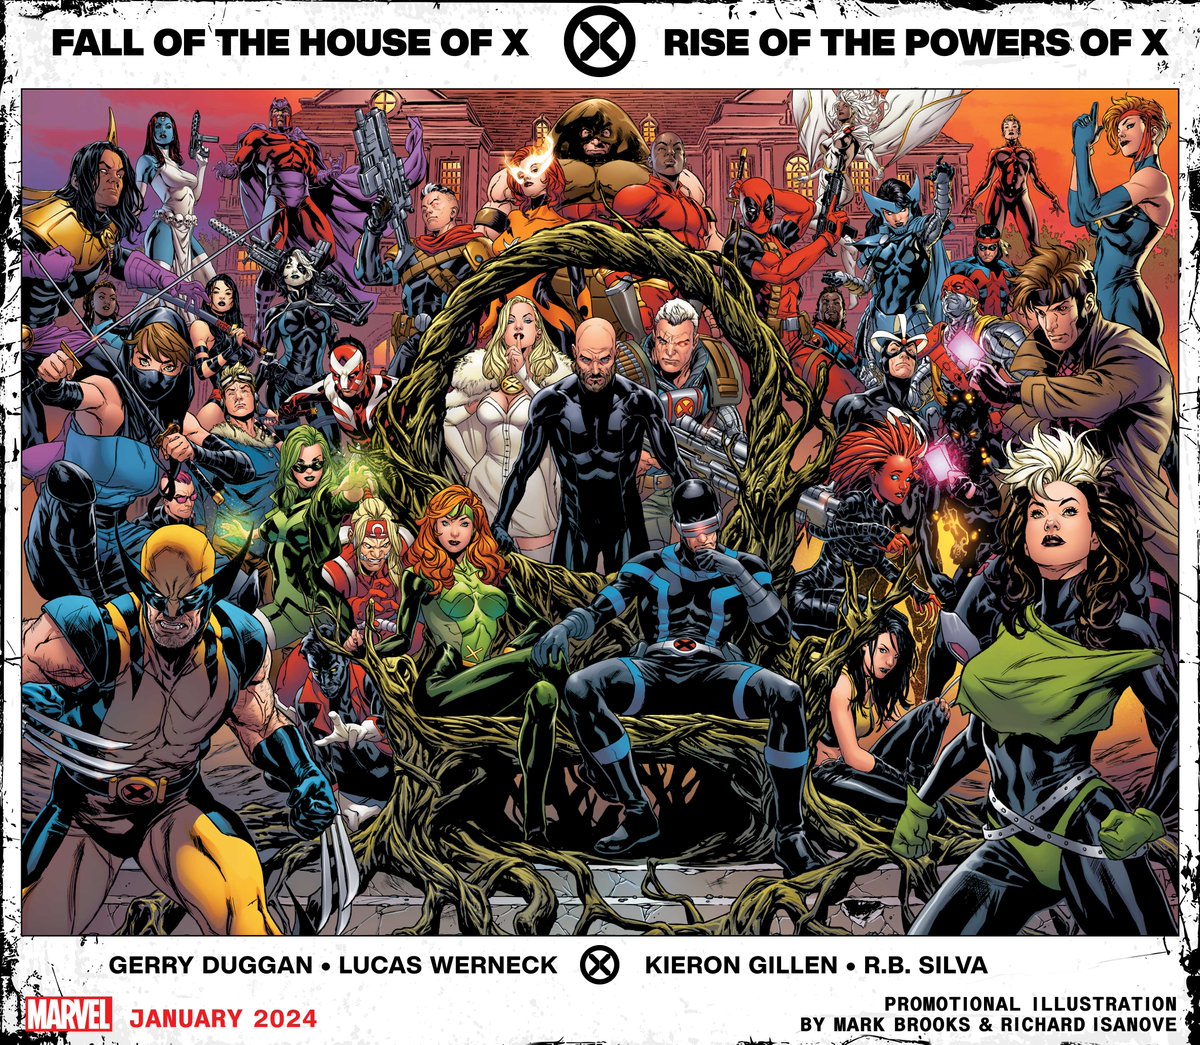 And with the Fall of the House of X, comes the Rise of the Powers of X. #MarvelNYCC